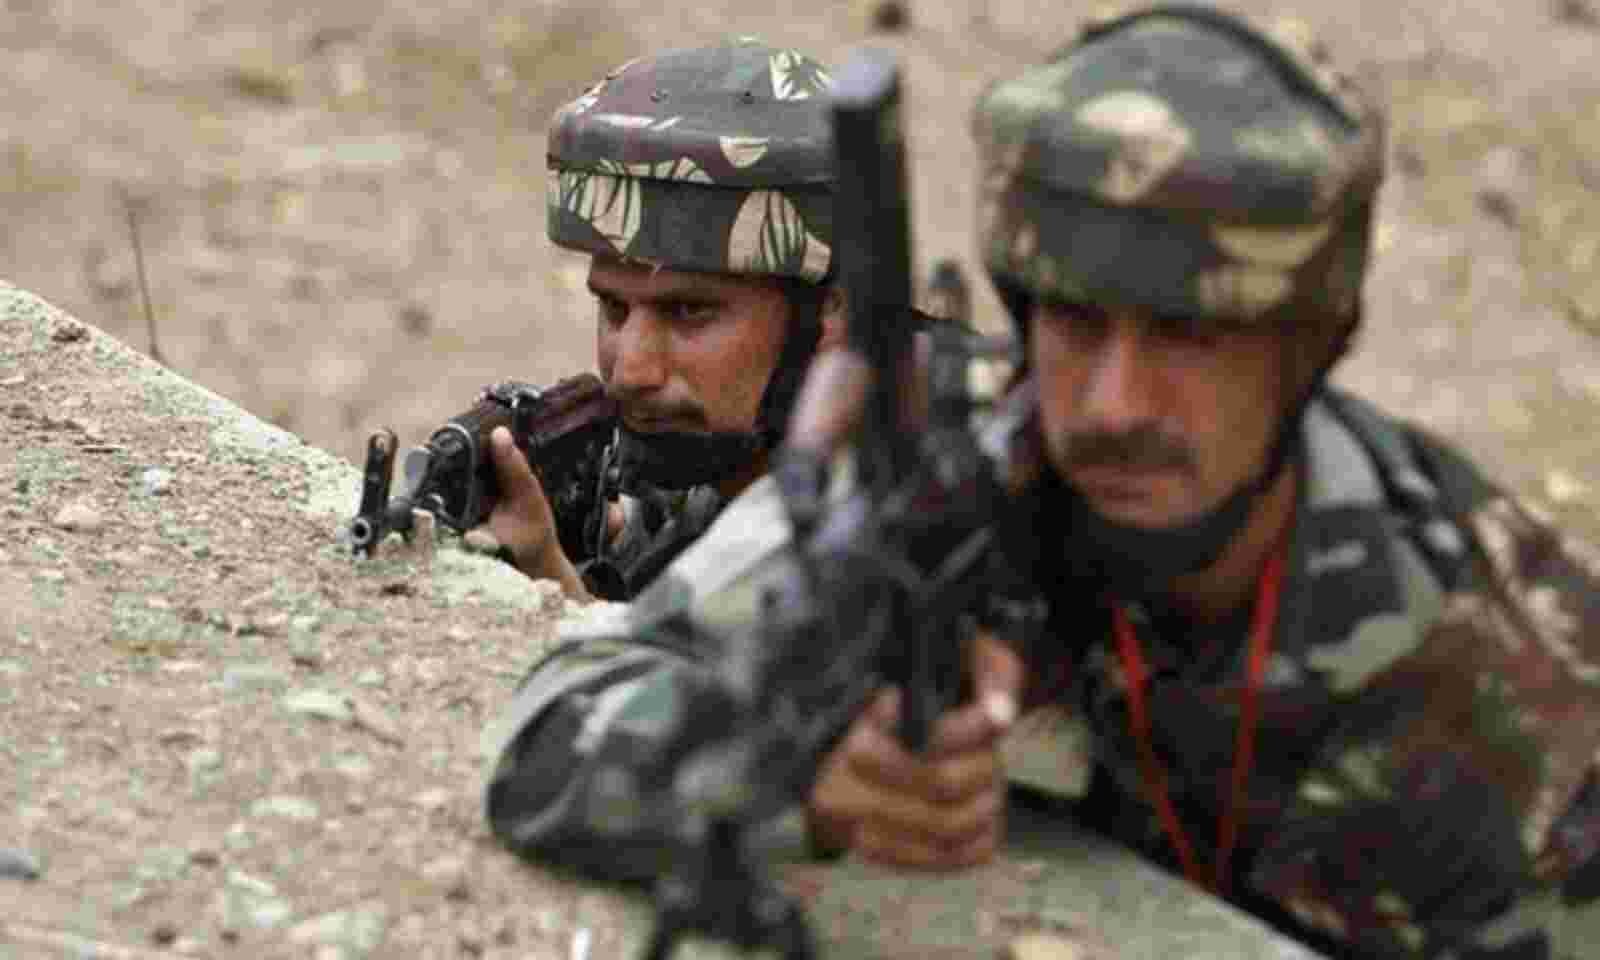 firing-in-the-military-station-at-bathinda-punjab-4-dead-search-operation-going-on